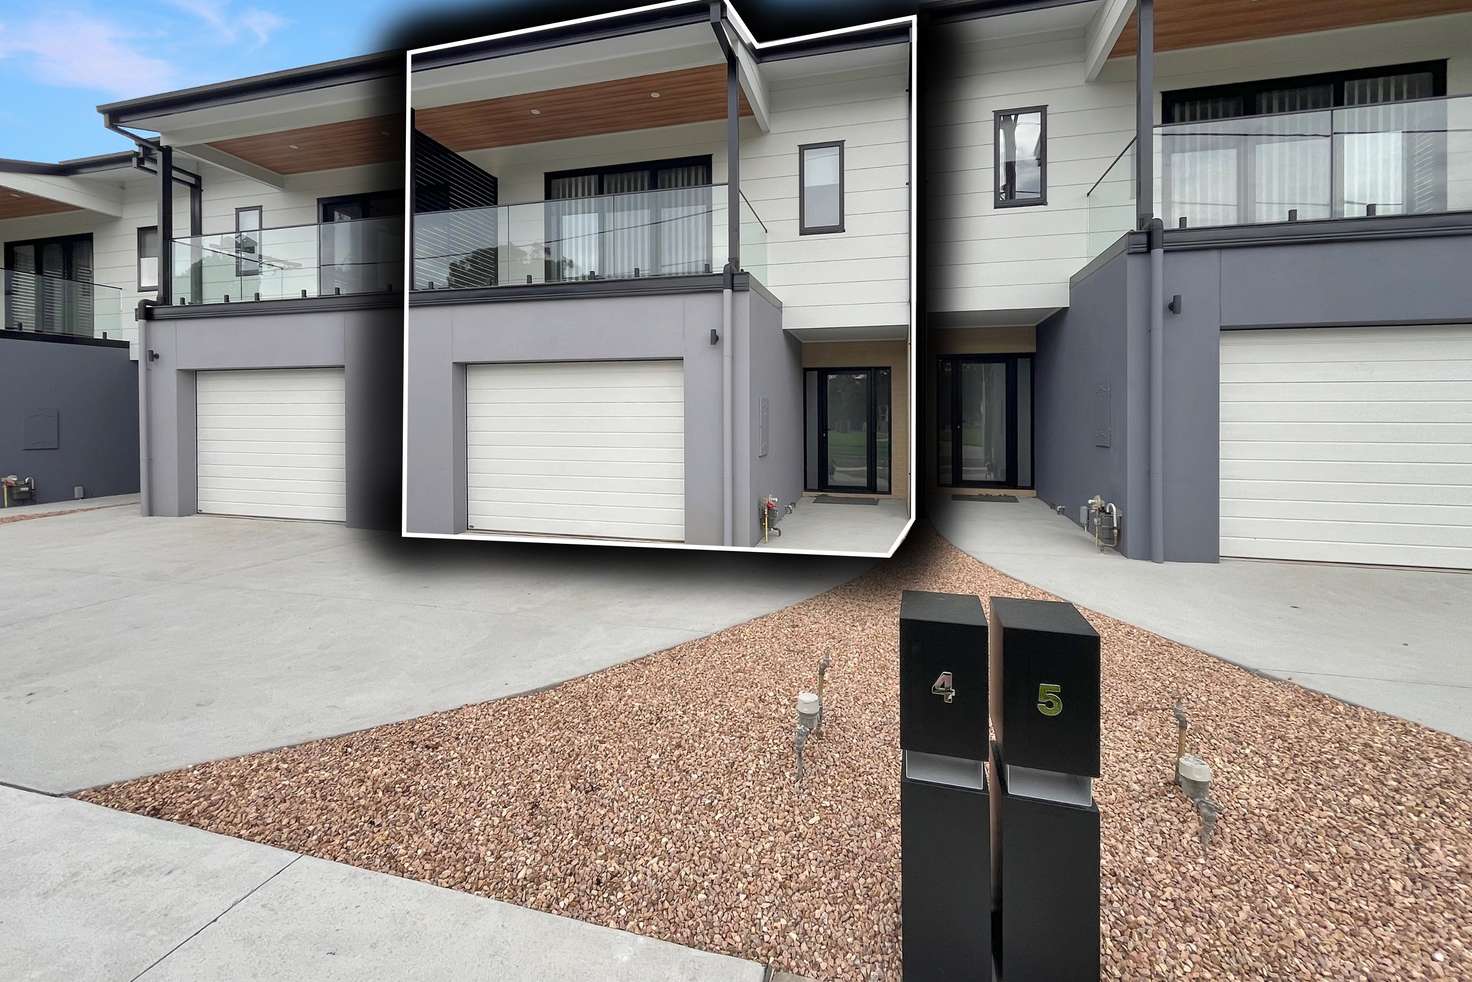 Main view of Homely townhouse listing, 4/2 Tennyson Street, Traralgon VIC 3844